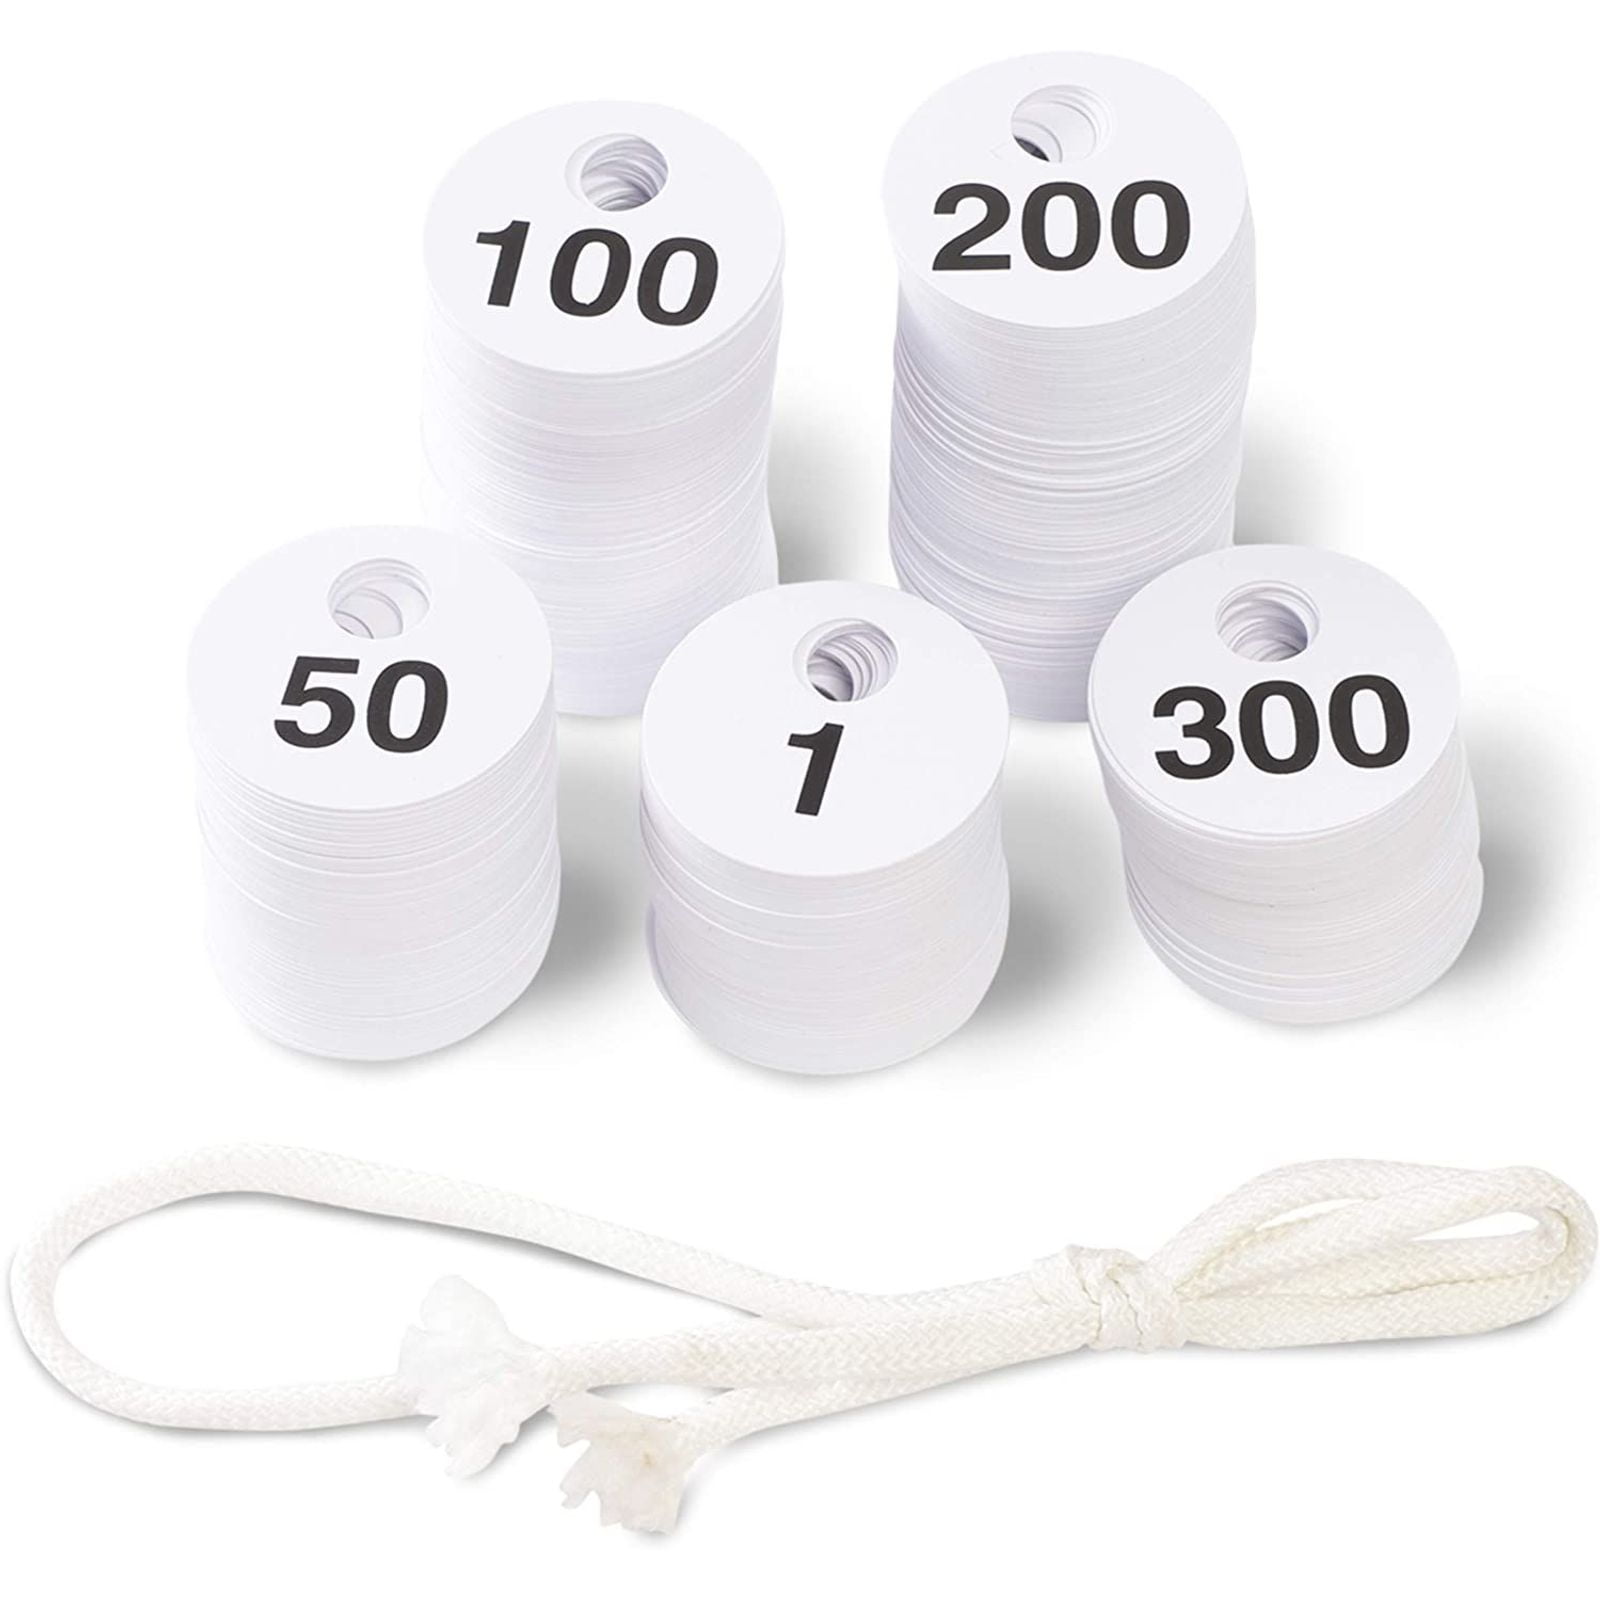 2-Set Reusable Plastic Coat Room Check Tag Numbered 1-300 per Set Double-Sided 